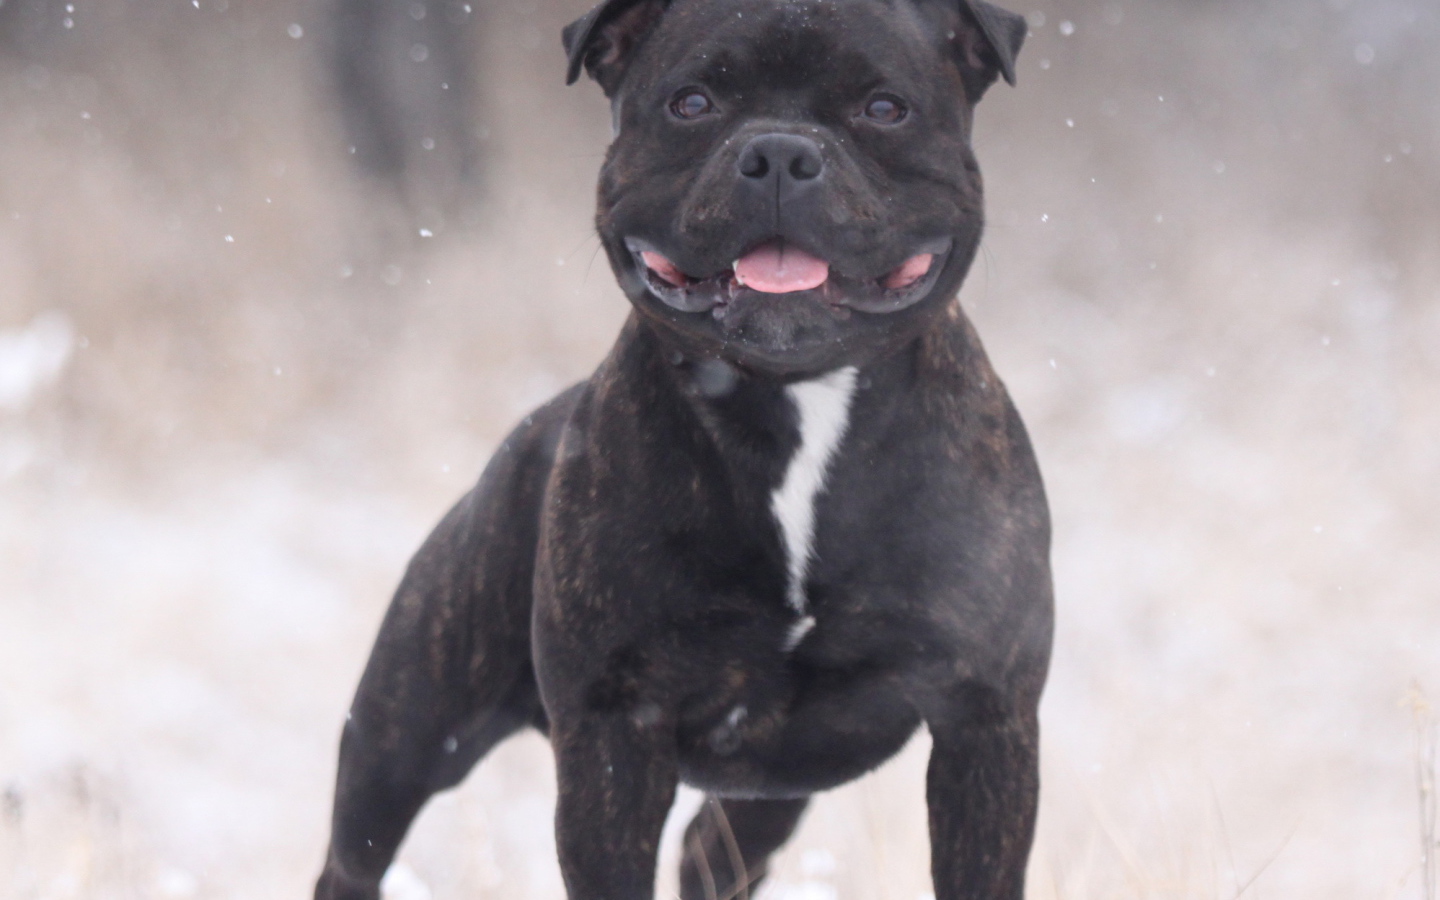 The Puppy Staffordshire Bull Terrier in winter time